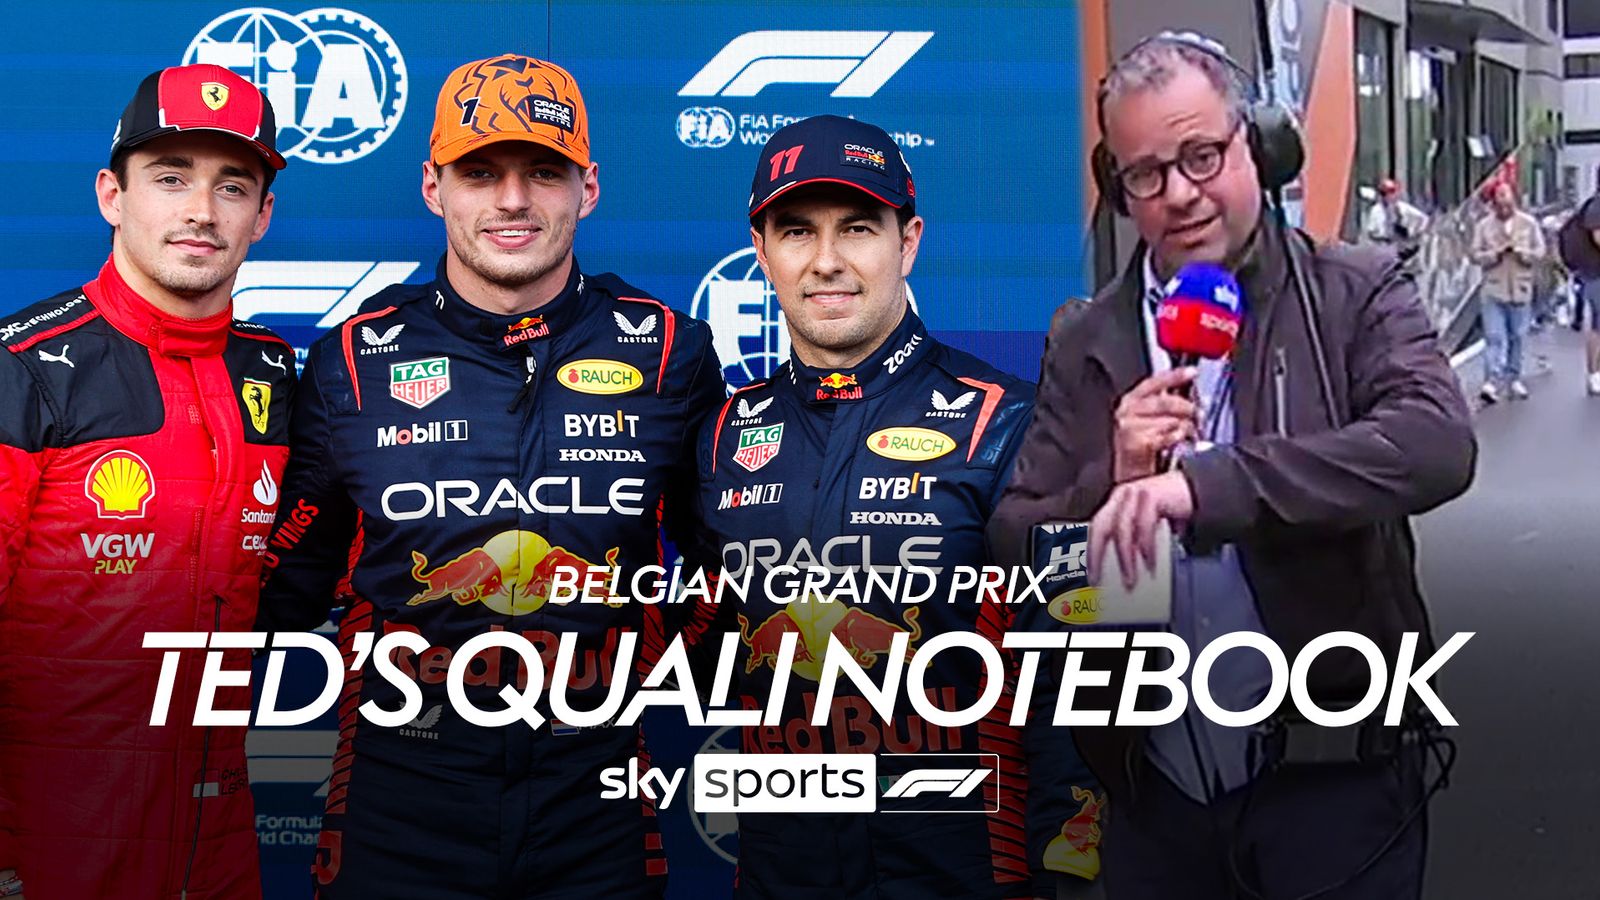 Ted's Qualifying Notebook | Belgian Grand Prix | F1 News | Sky Sports